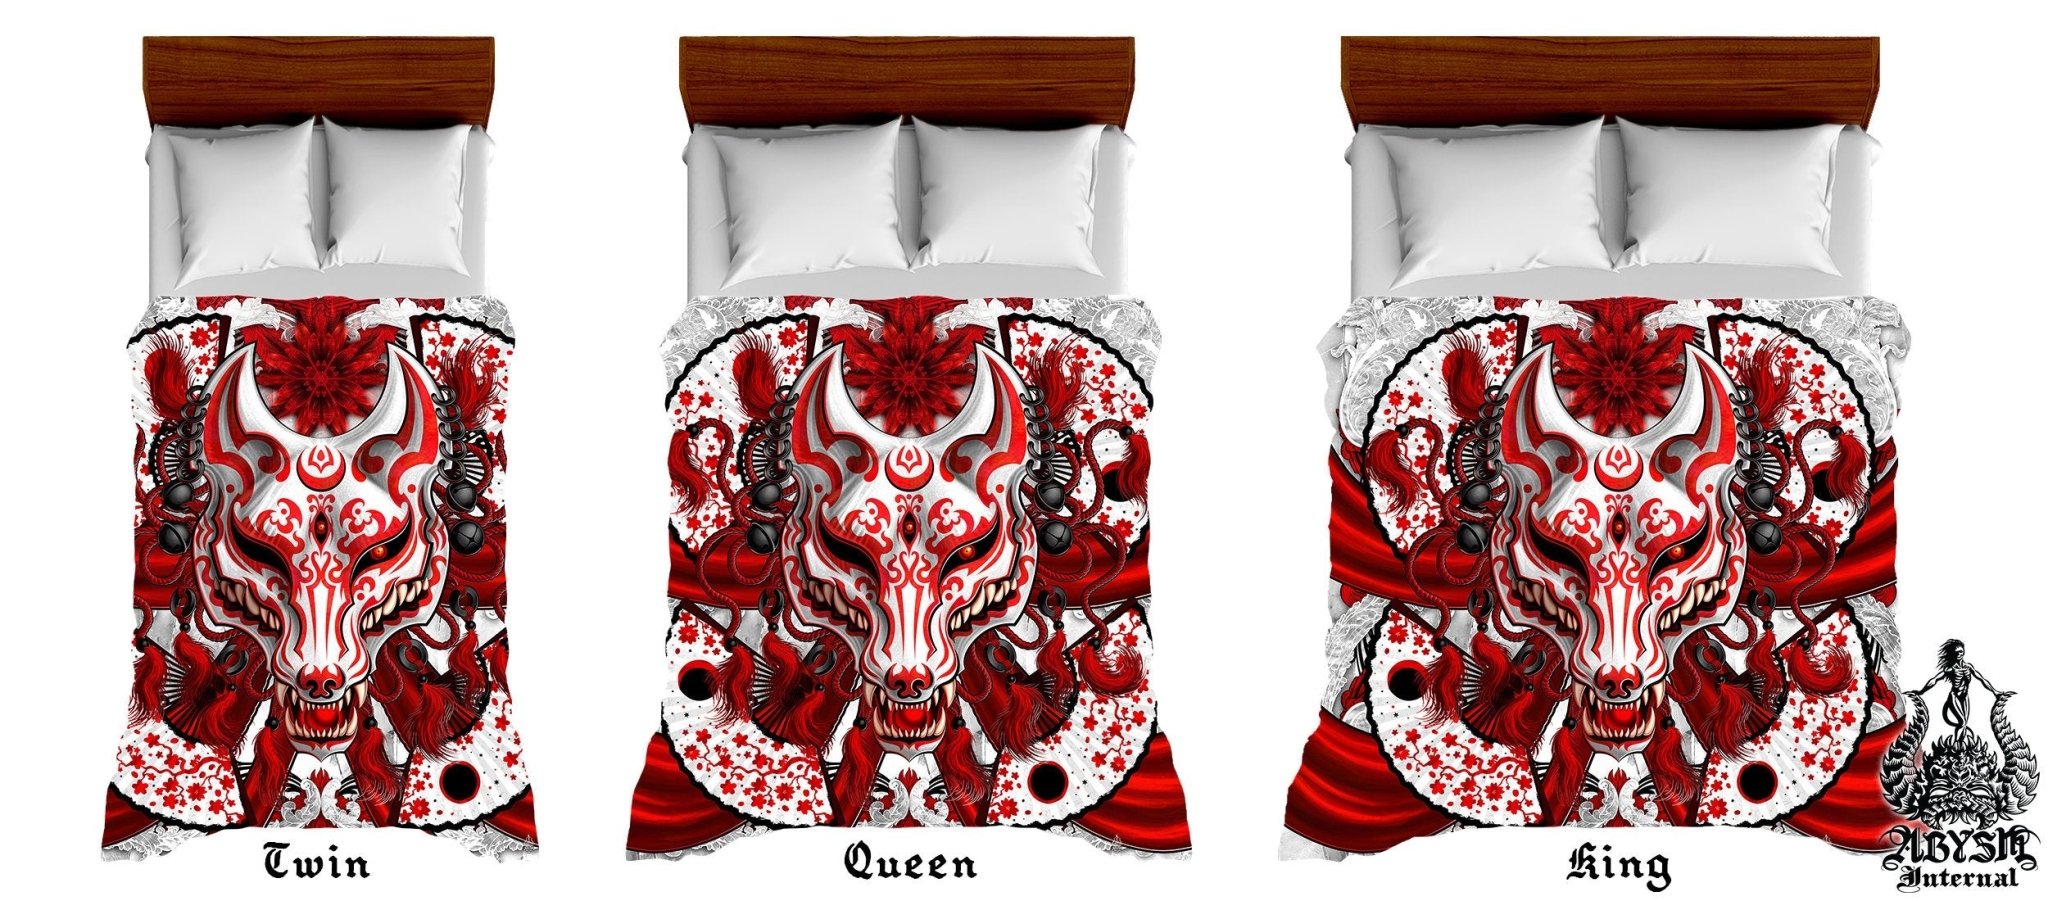 Kitsune Mask Bedding Set, Comforter and Duvet, Gamer Bed Cover and Bedroom Decor, Fox Okami, Anime Art, King, Queen and Twin Size - Bloody White Goth - Abysm Internal